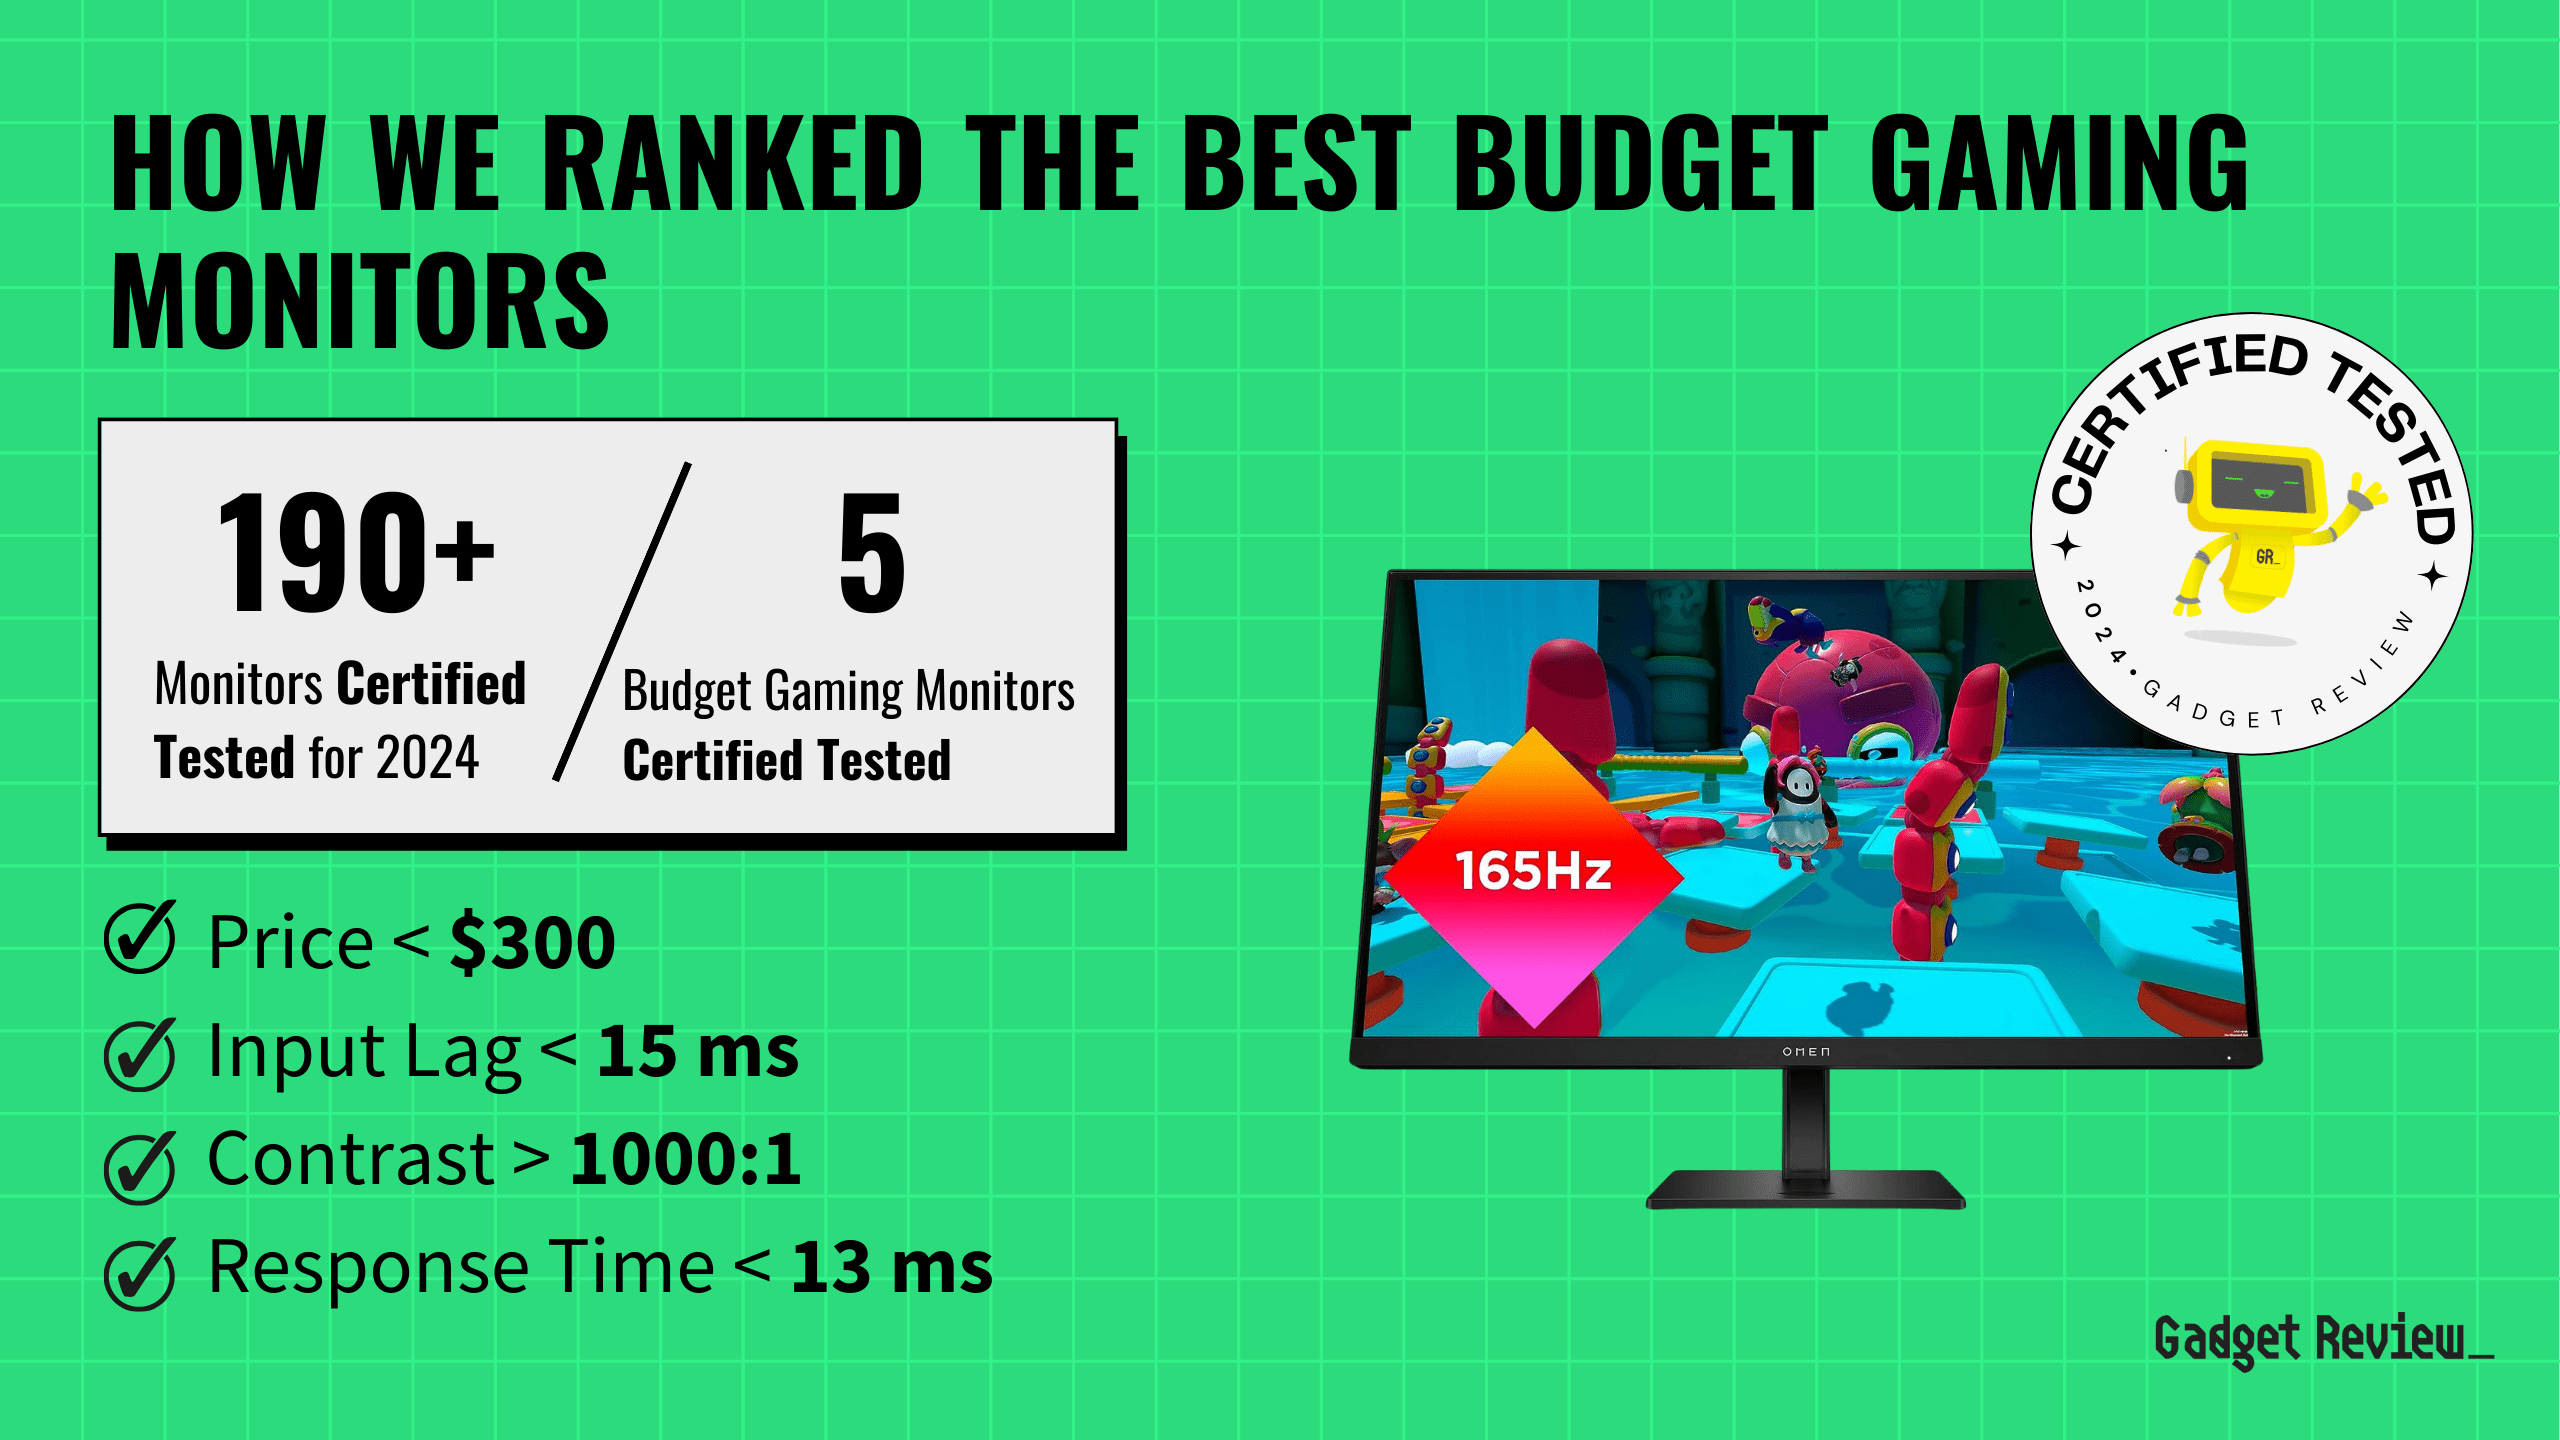 best budget gaming monitor guide that shows the top best gaming monitor model